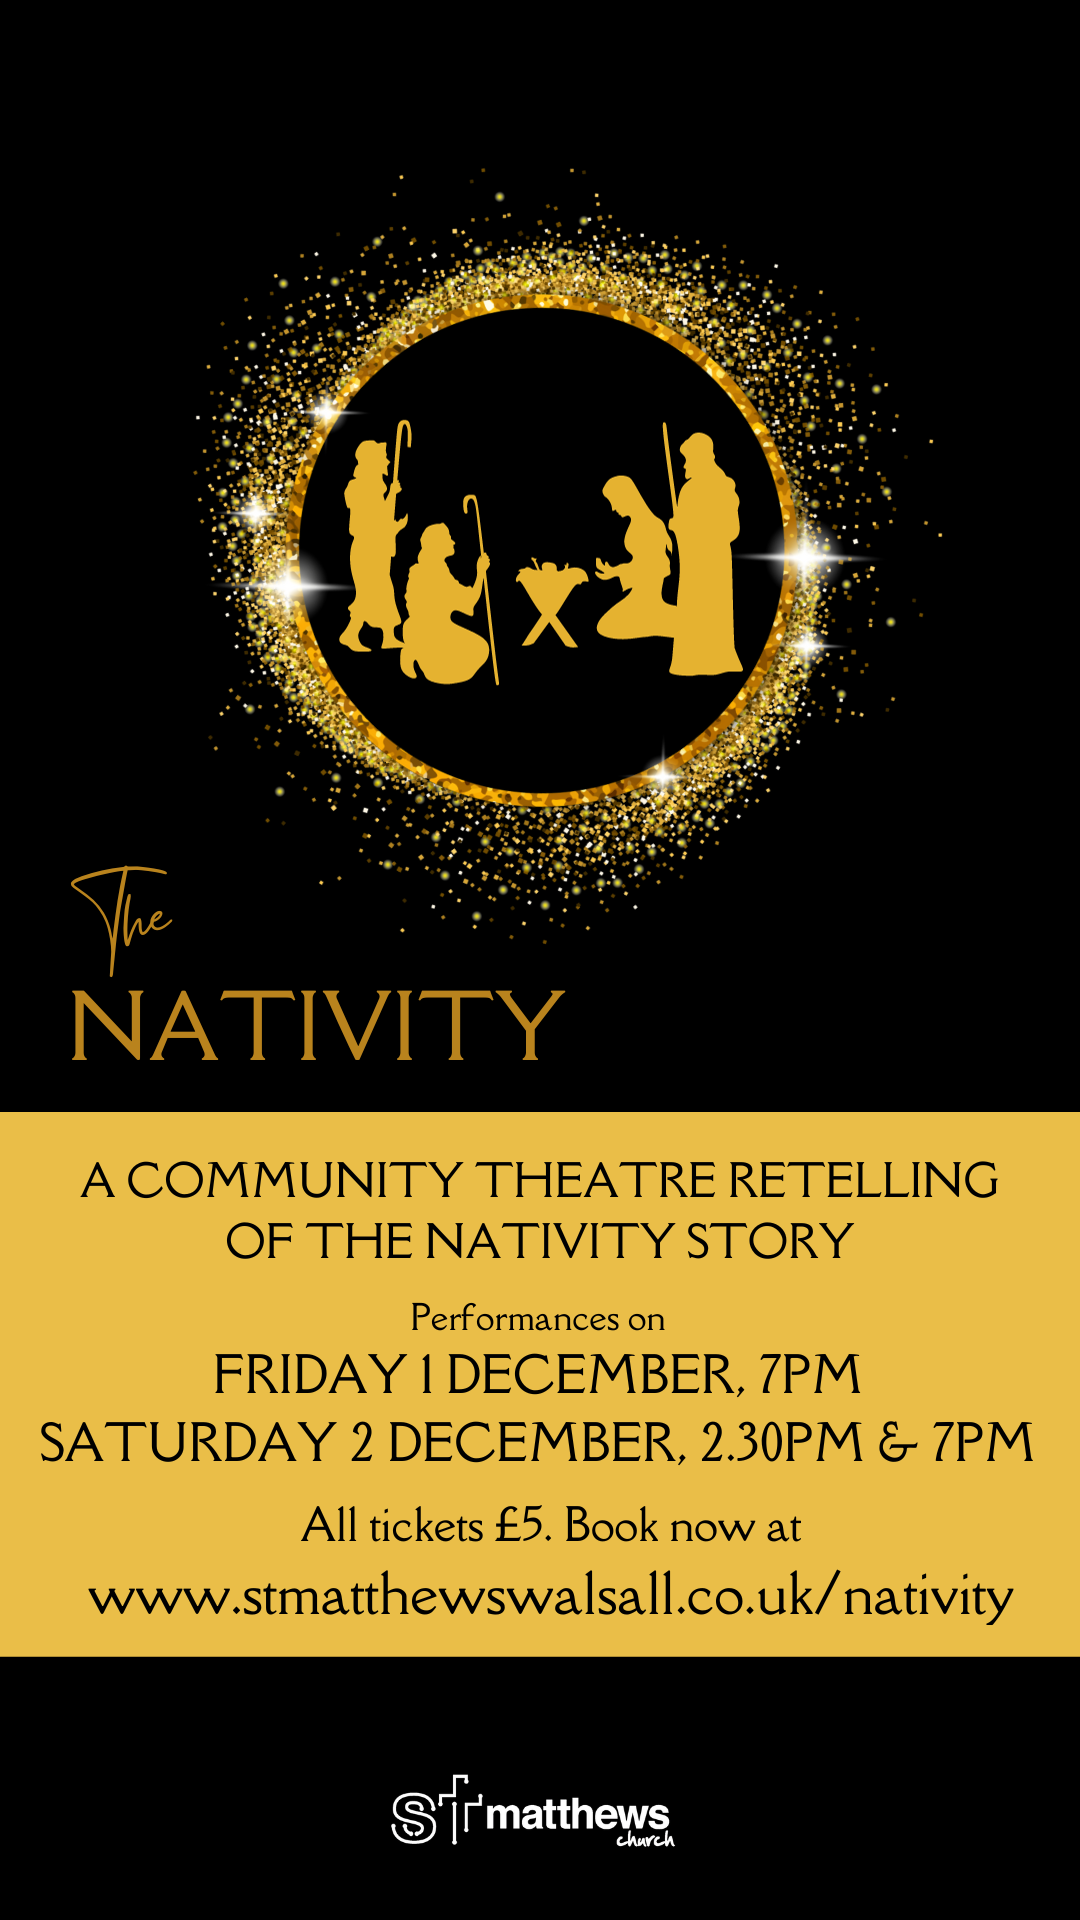 A black background with a sparkly golden circle with Mary and the Wise Men in the middle looking at Jesus' crib. Text below reads "The Nativity. A community theatre retelling of the nativity story. Performances on Friday 1st December 7PM, Saturday 2nd December 2:30PM & 7PM. All tickets £5. Book now at www.stmatthewswalsall.co.uk/nativity